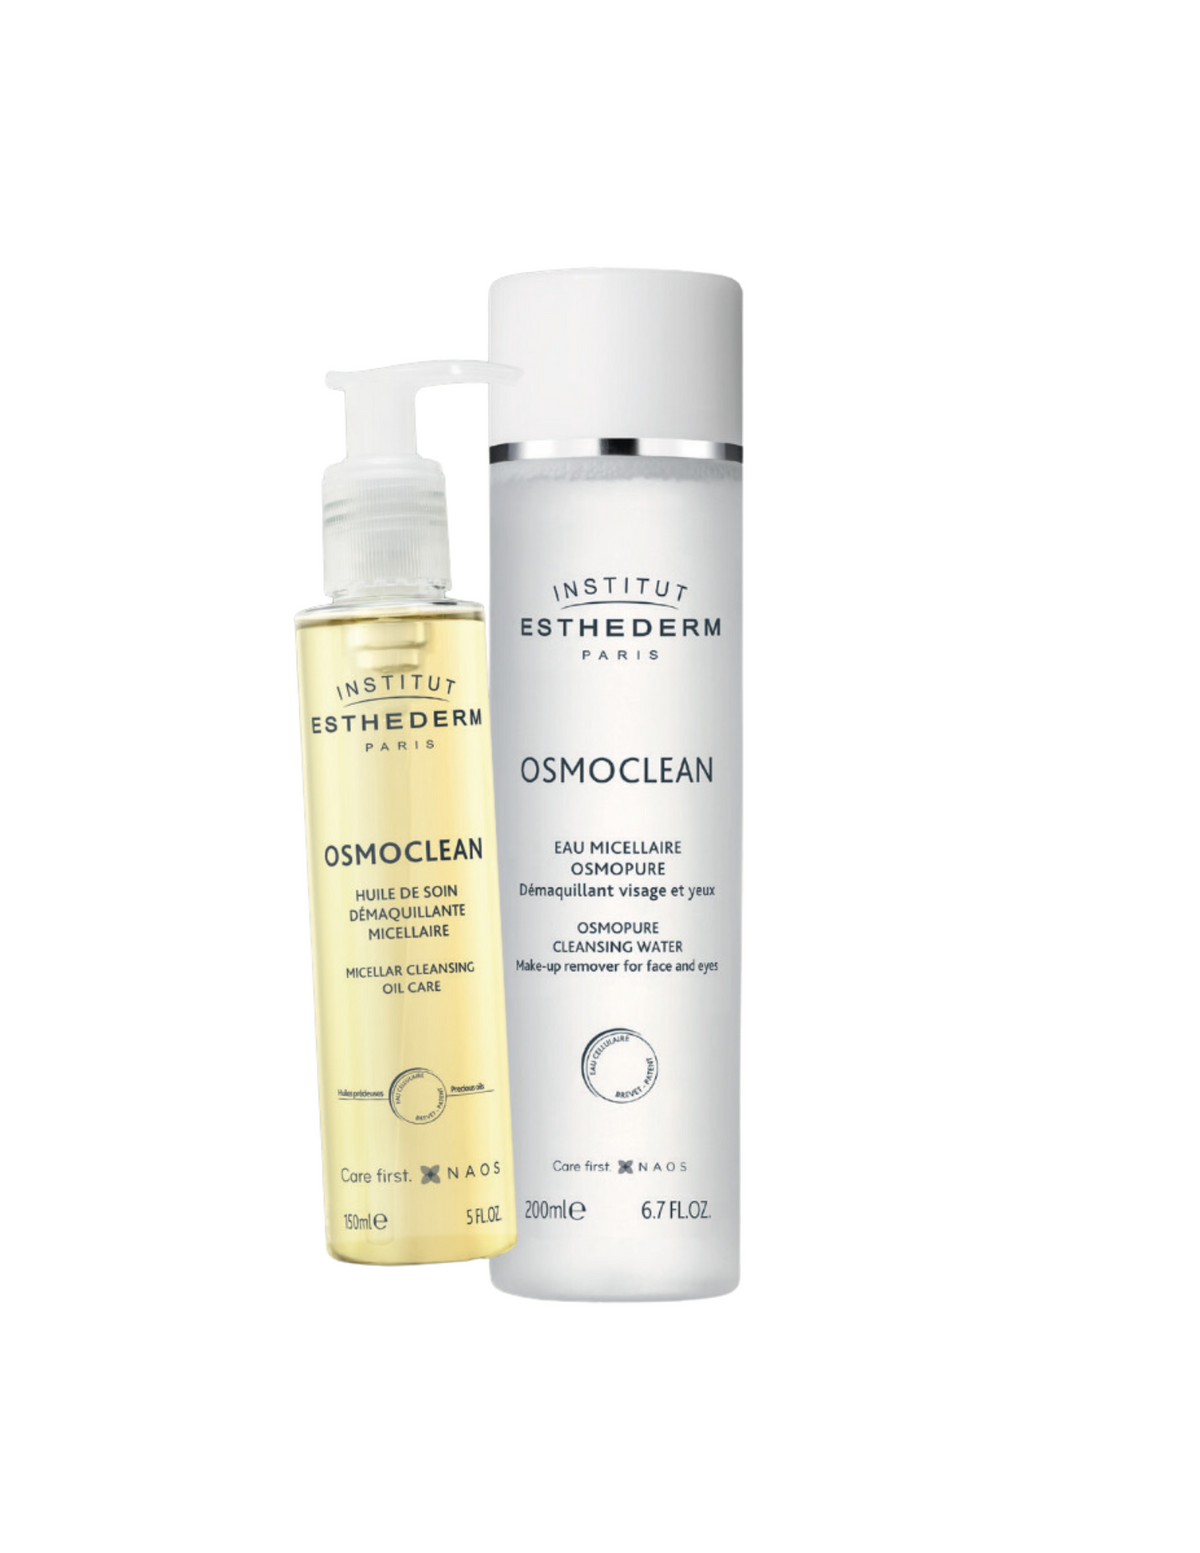 Esthederm - Duo micellaire